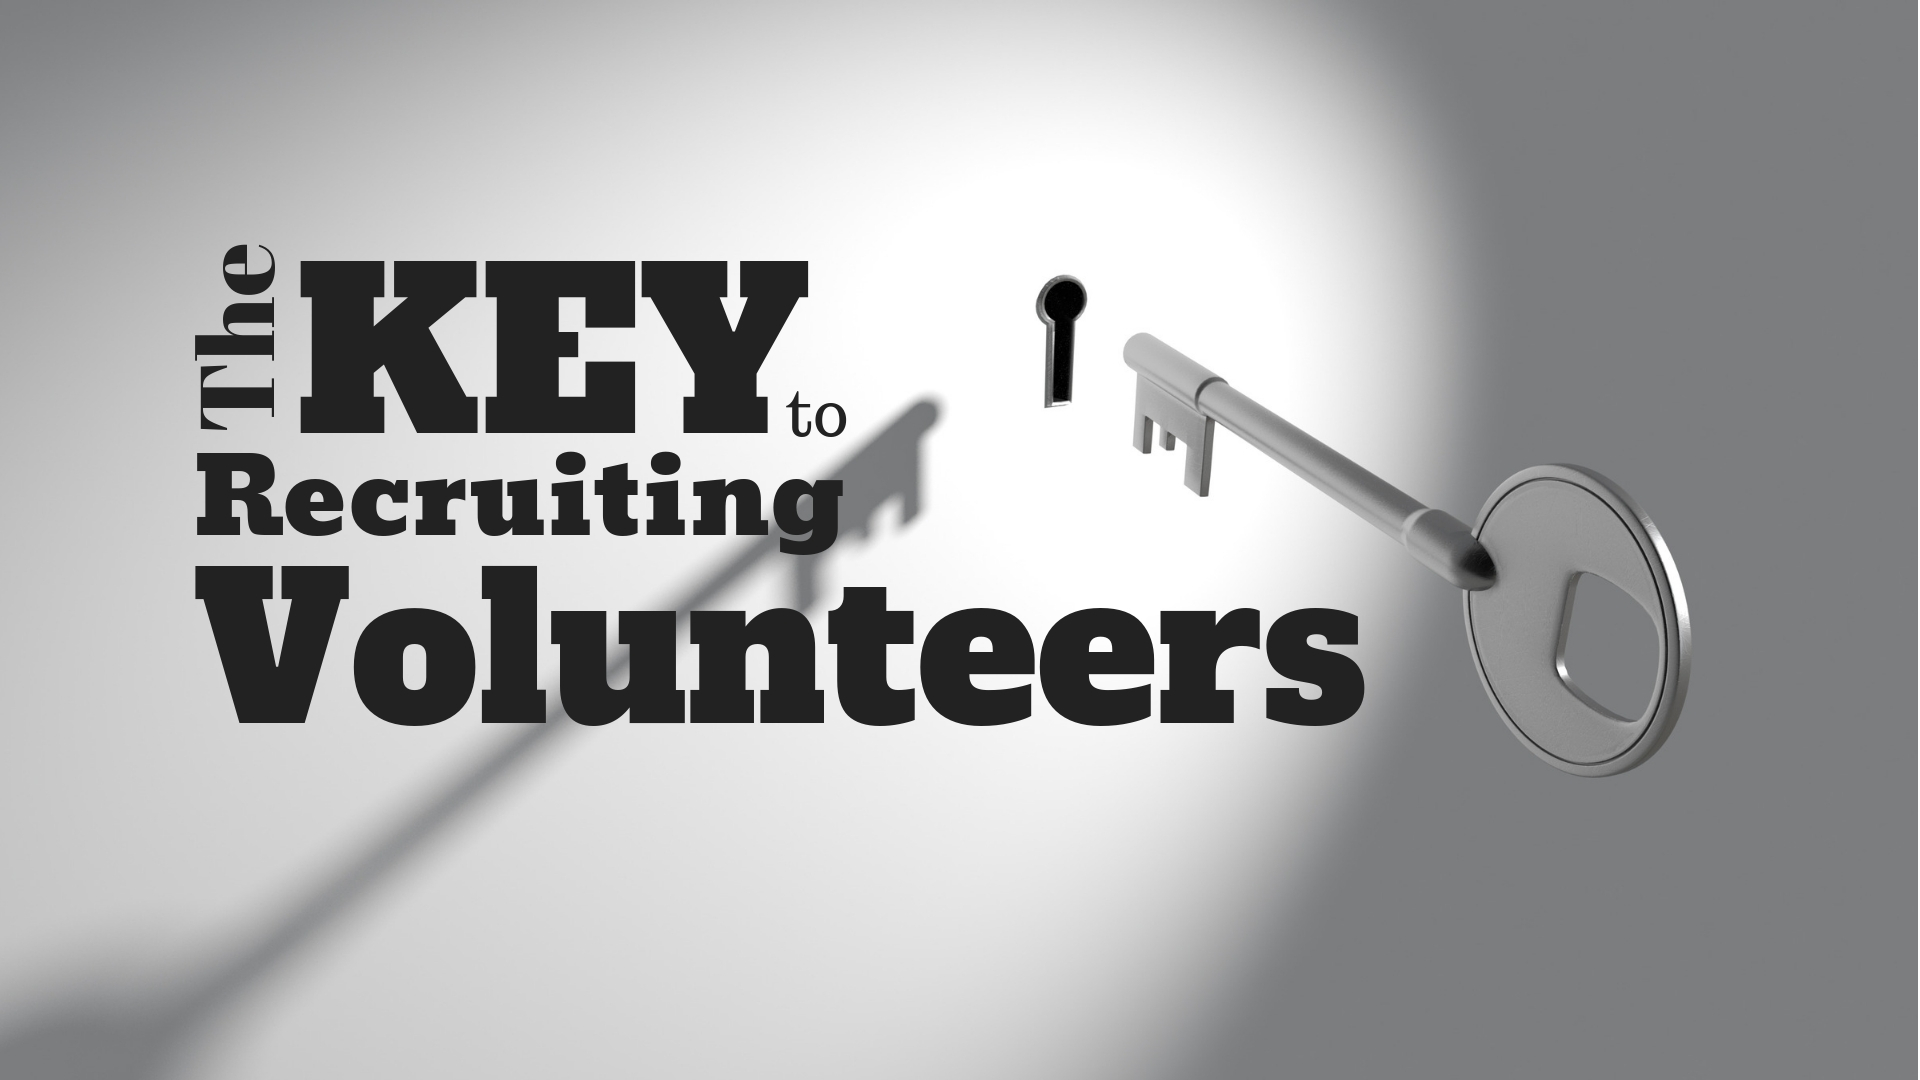 The Key to Recruiting Volunteers